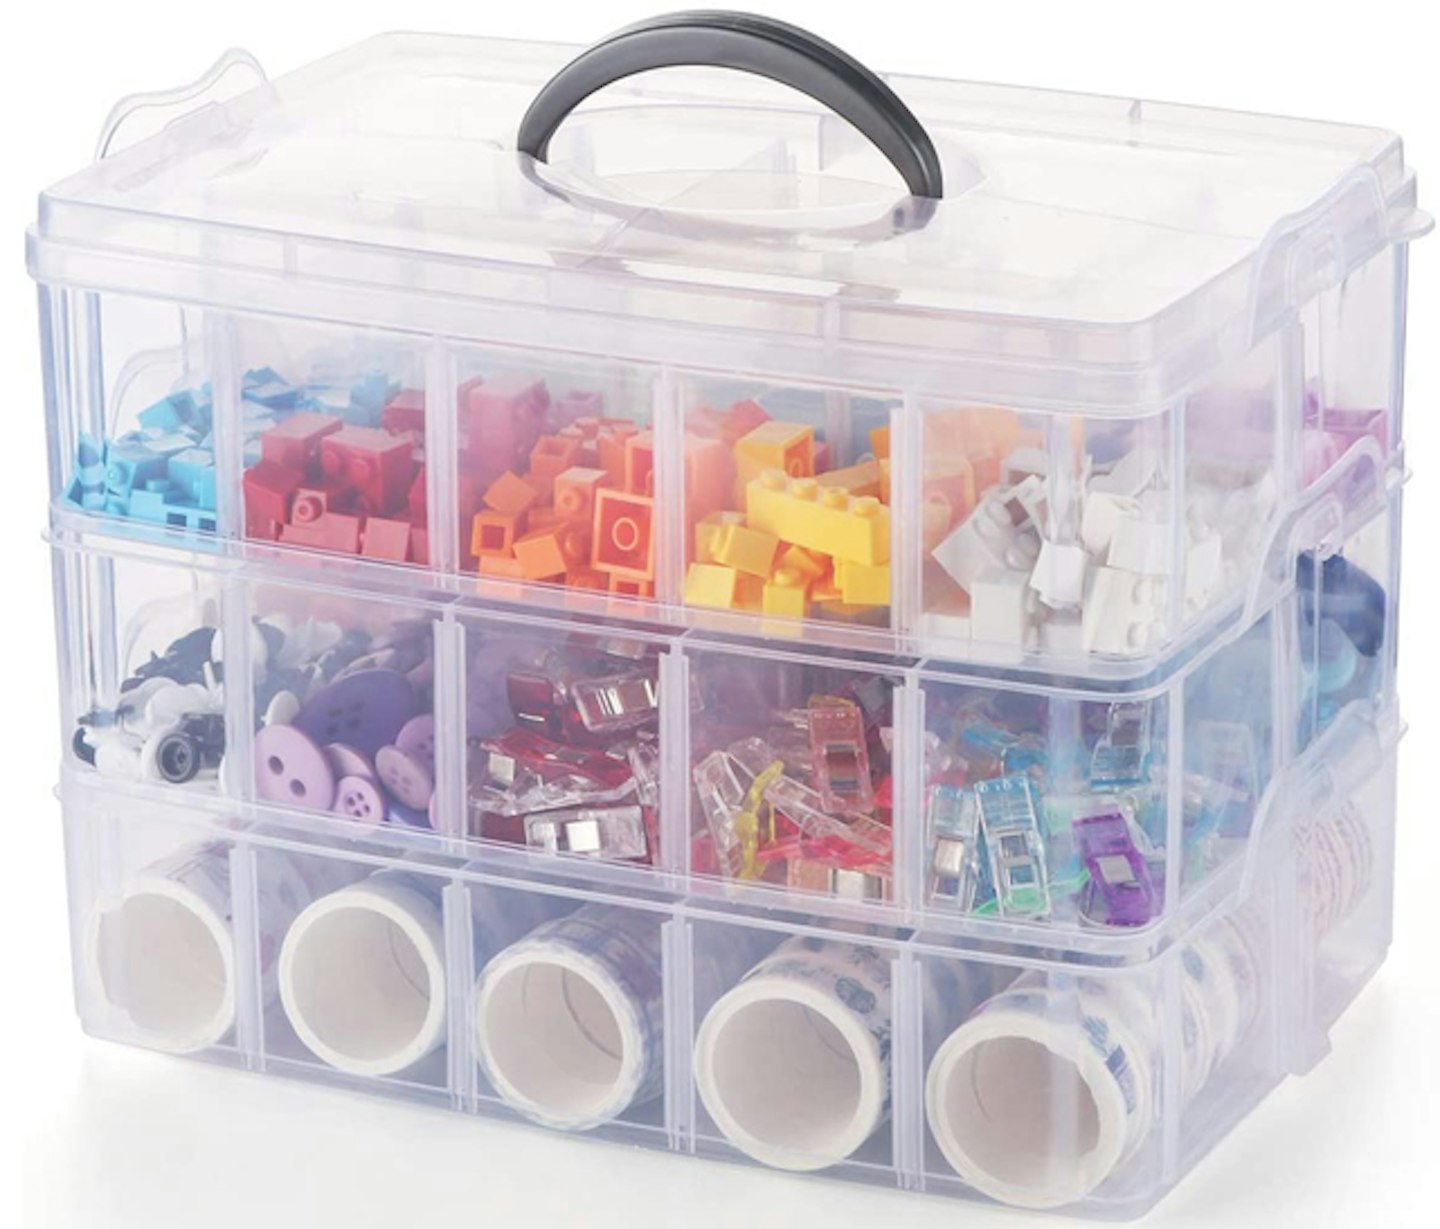 Craft storage box ideas to keep your art room in order